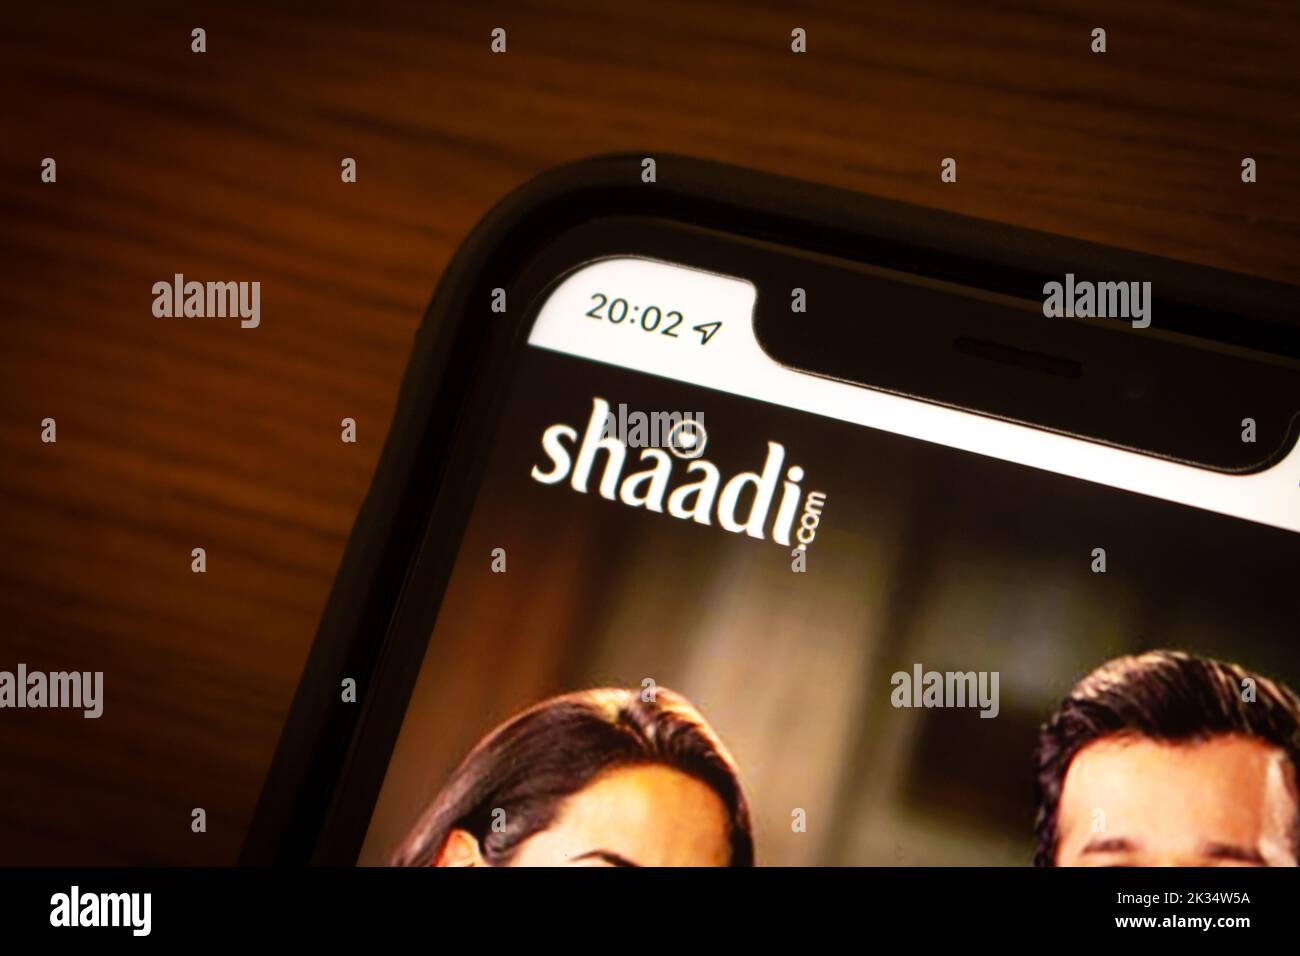 Logo of Shaadi on its website on iPhone in dark mood. Shaadi.com is an Indian online wedding service. Core market is India, Pakistan, and Bangladesh Stock Photo